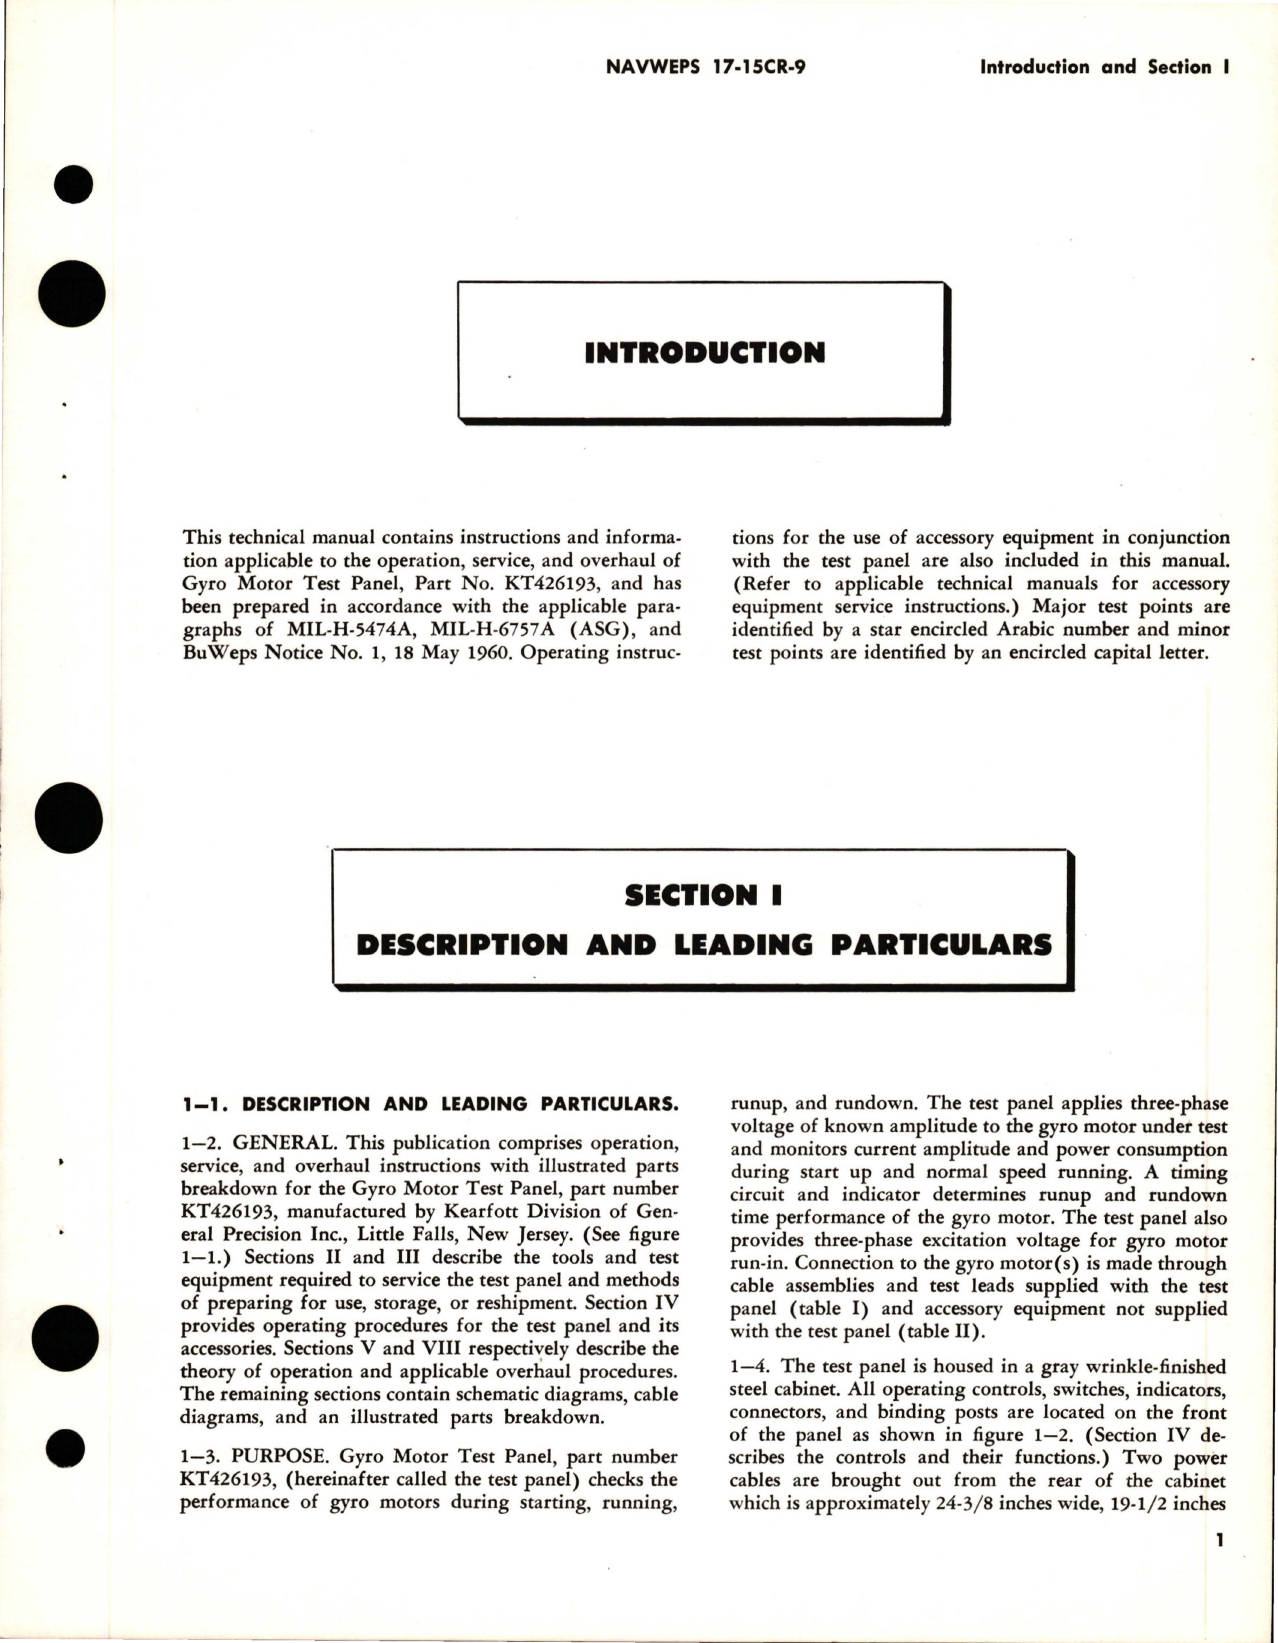 Sample page 5 from AirCorps Library document: Operation, Service Instructions and Illustrated Parts Breakdown for Gyro Motor Test Panel - Part KT426193